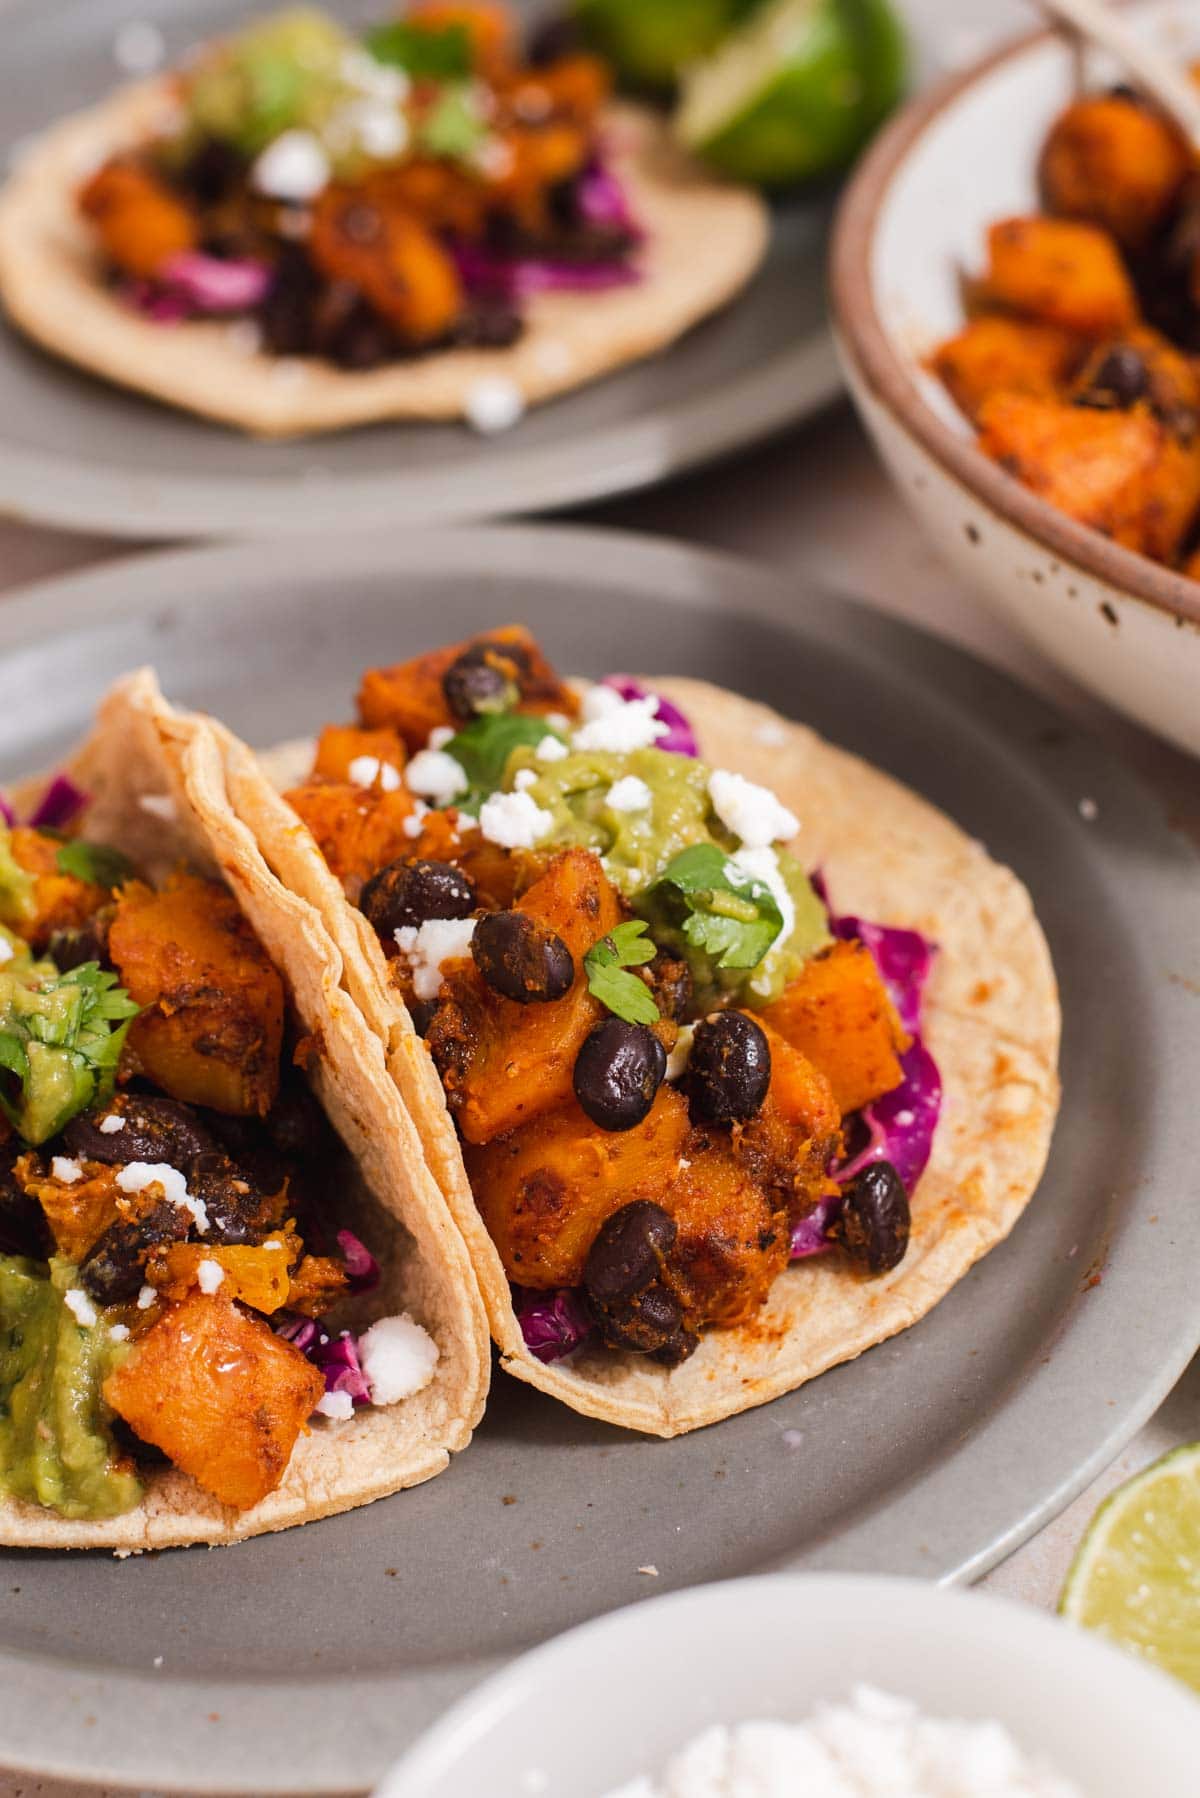 Two corn tortillas filled with butternut squash, black beans, and guacamole